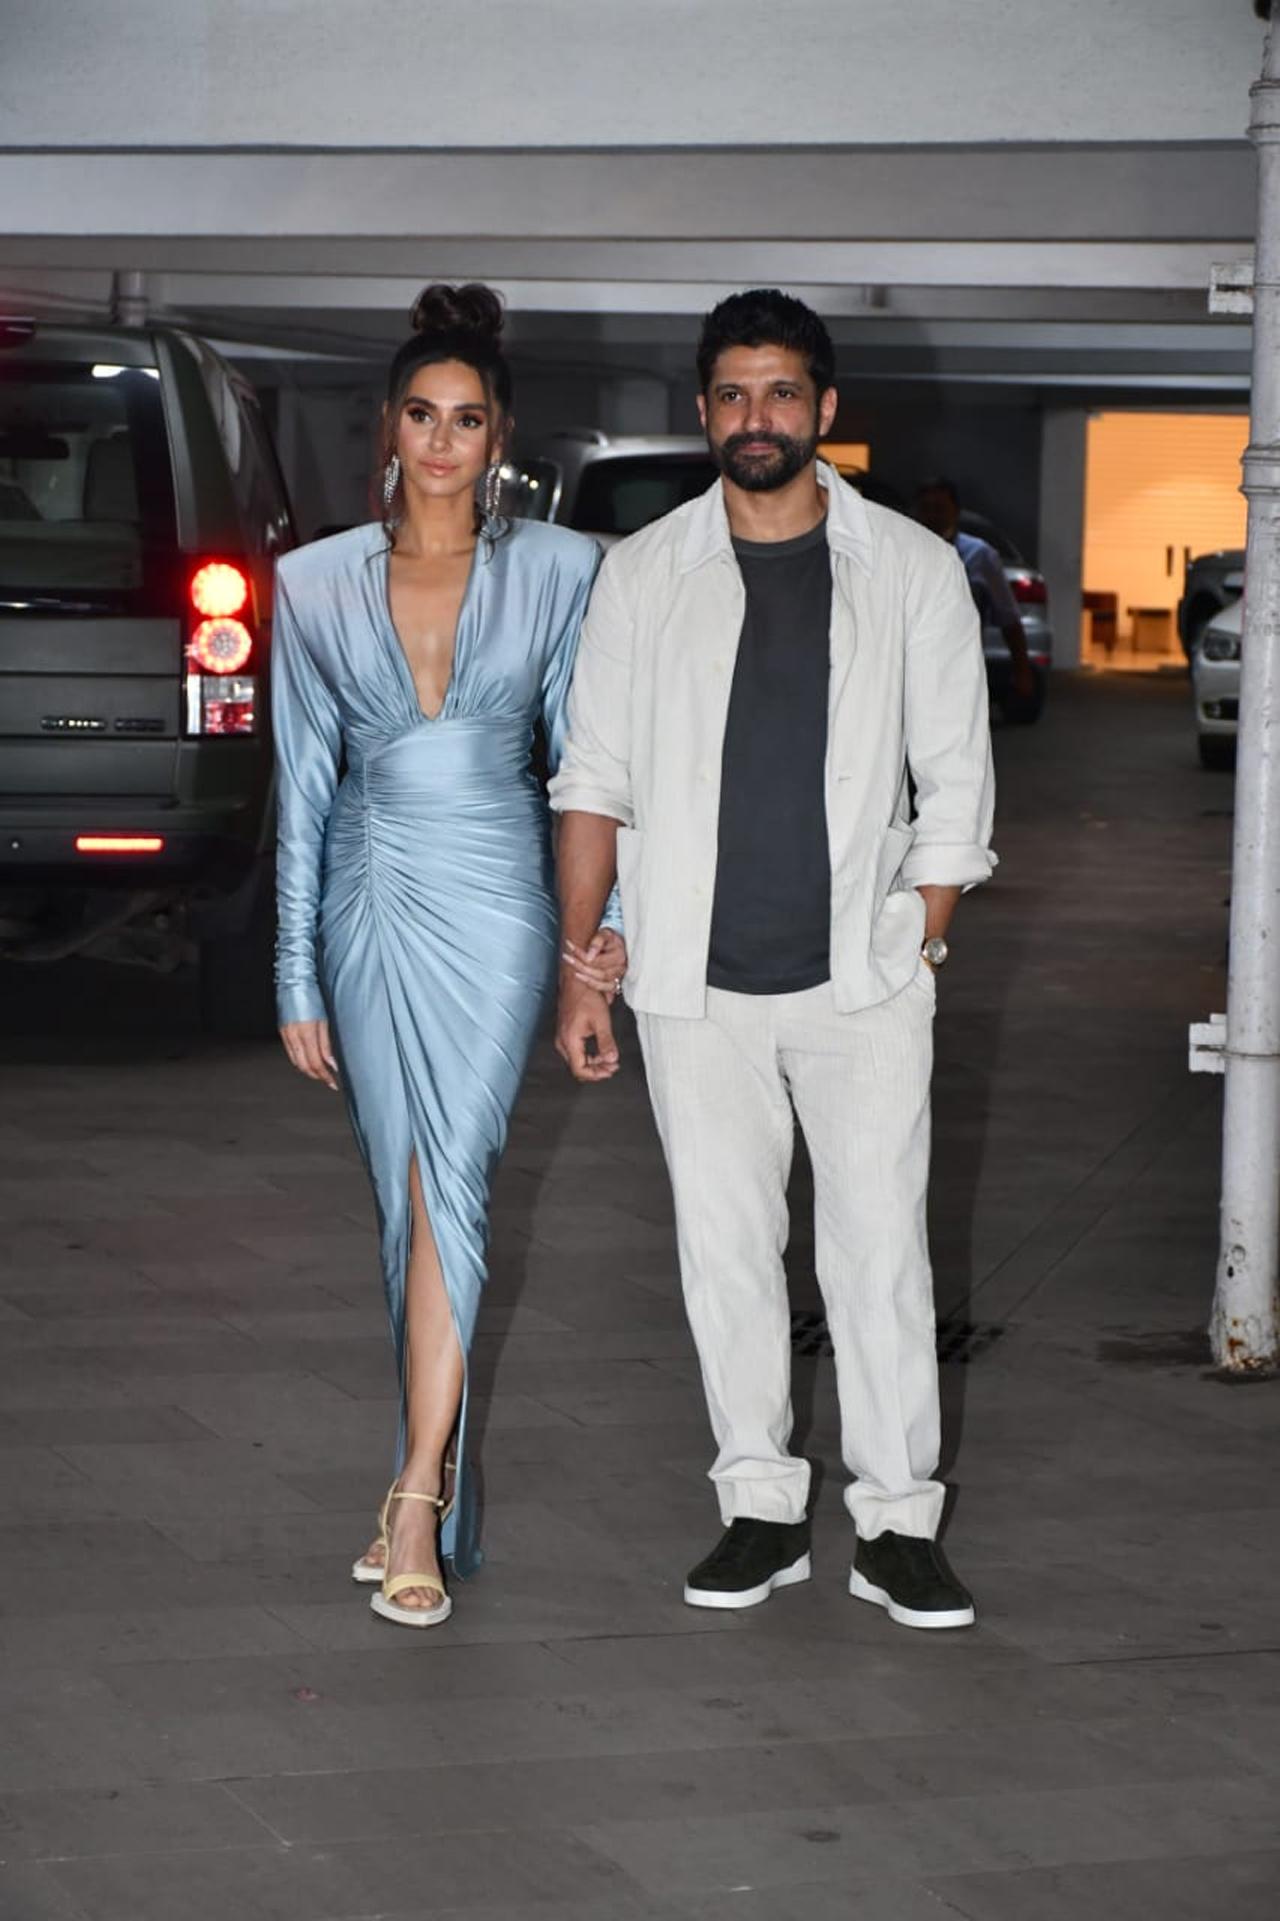 It's a revelling Thursday night for Bollywood stars as they attended Farhan Akhtar-Shibani Dandekar's wedding bash hosted by producer Ritesh Sidhwani. Speaking of the new bride and groom, they made a captivating entry at the bash holding each other's hands. Shibani was dressed for the occasion in a blue gown while Farhan joined her in casuals. The two got married on February 19 after dating for almost four years.